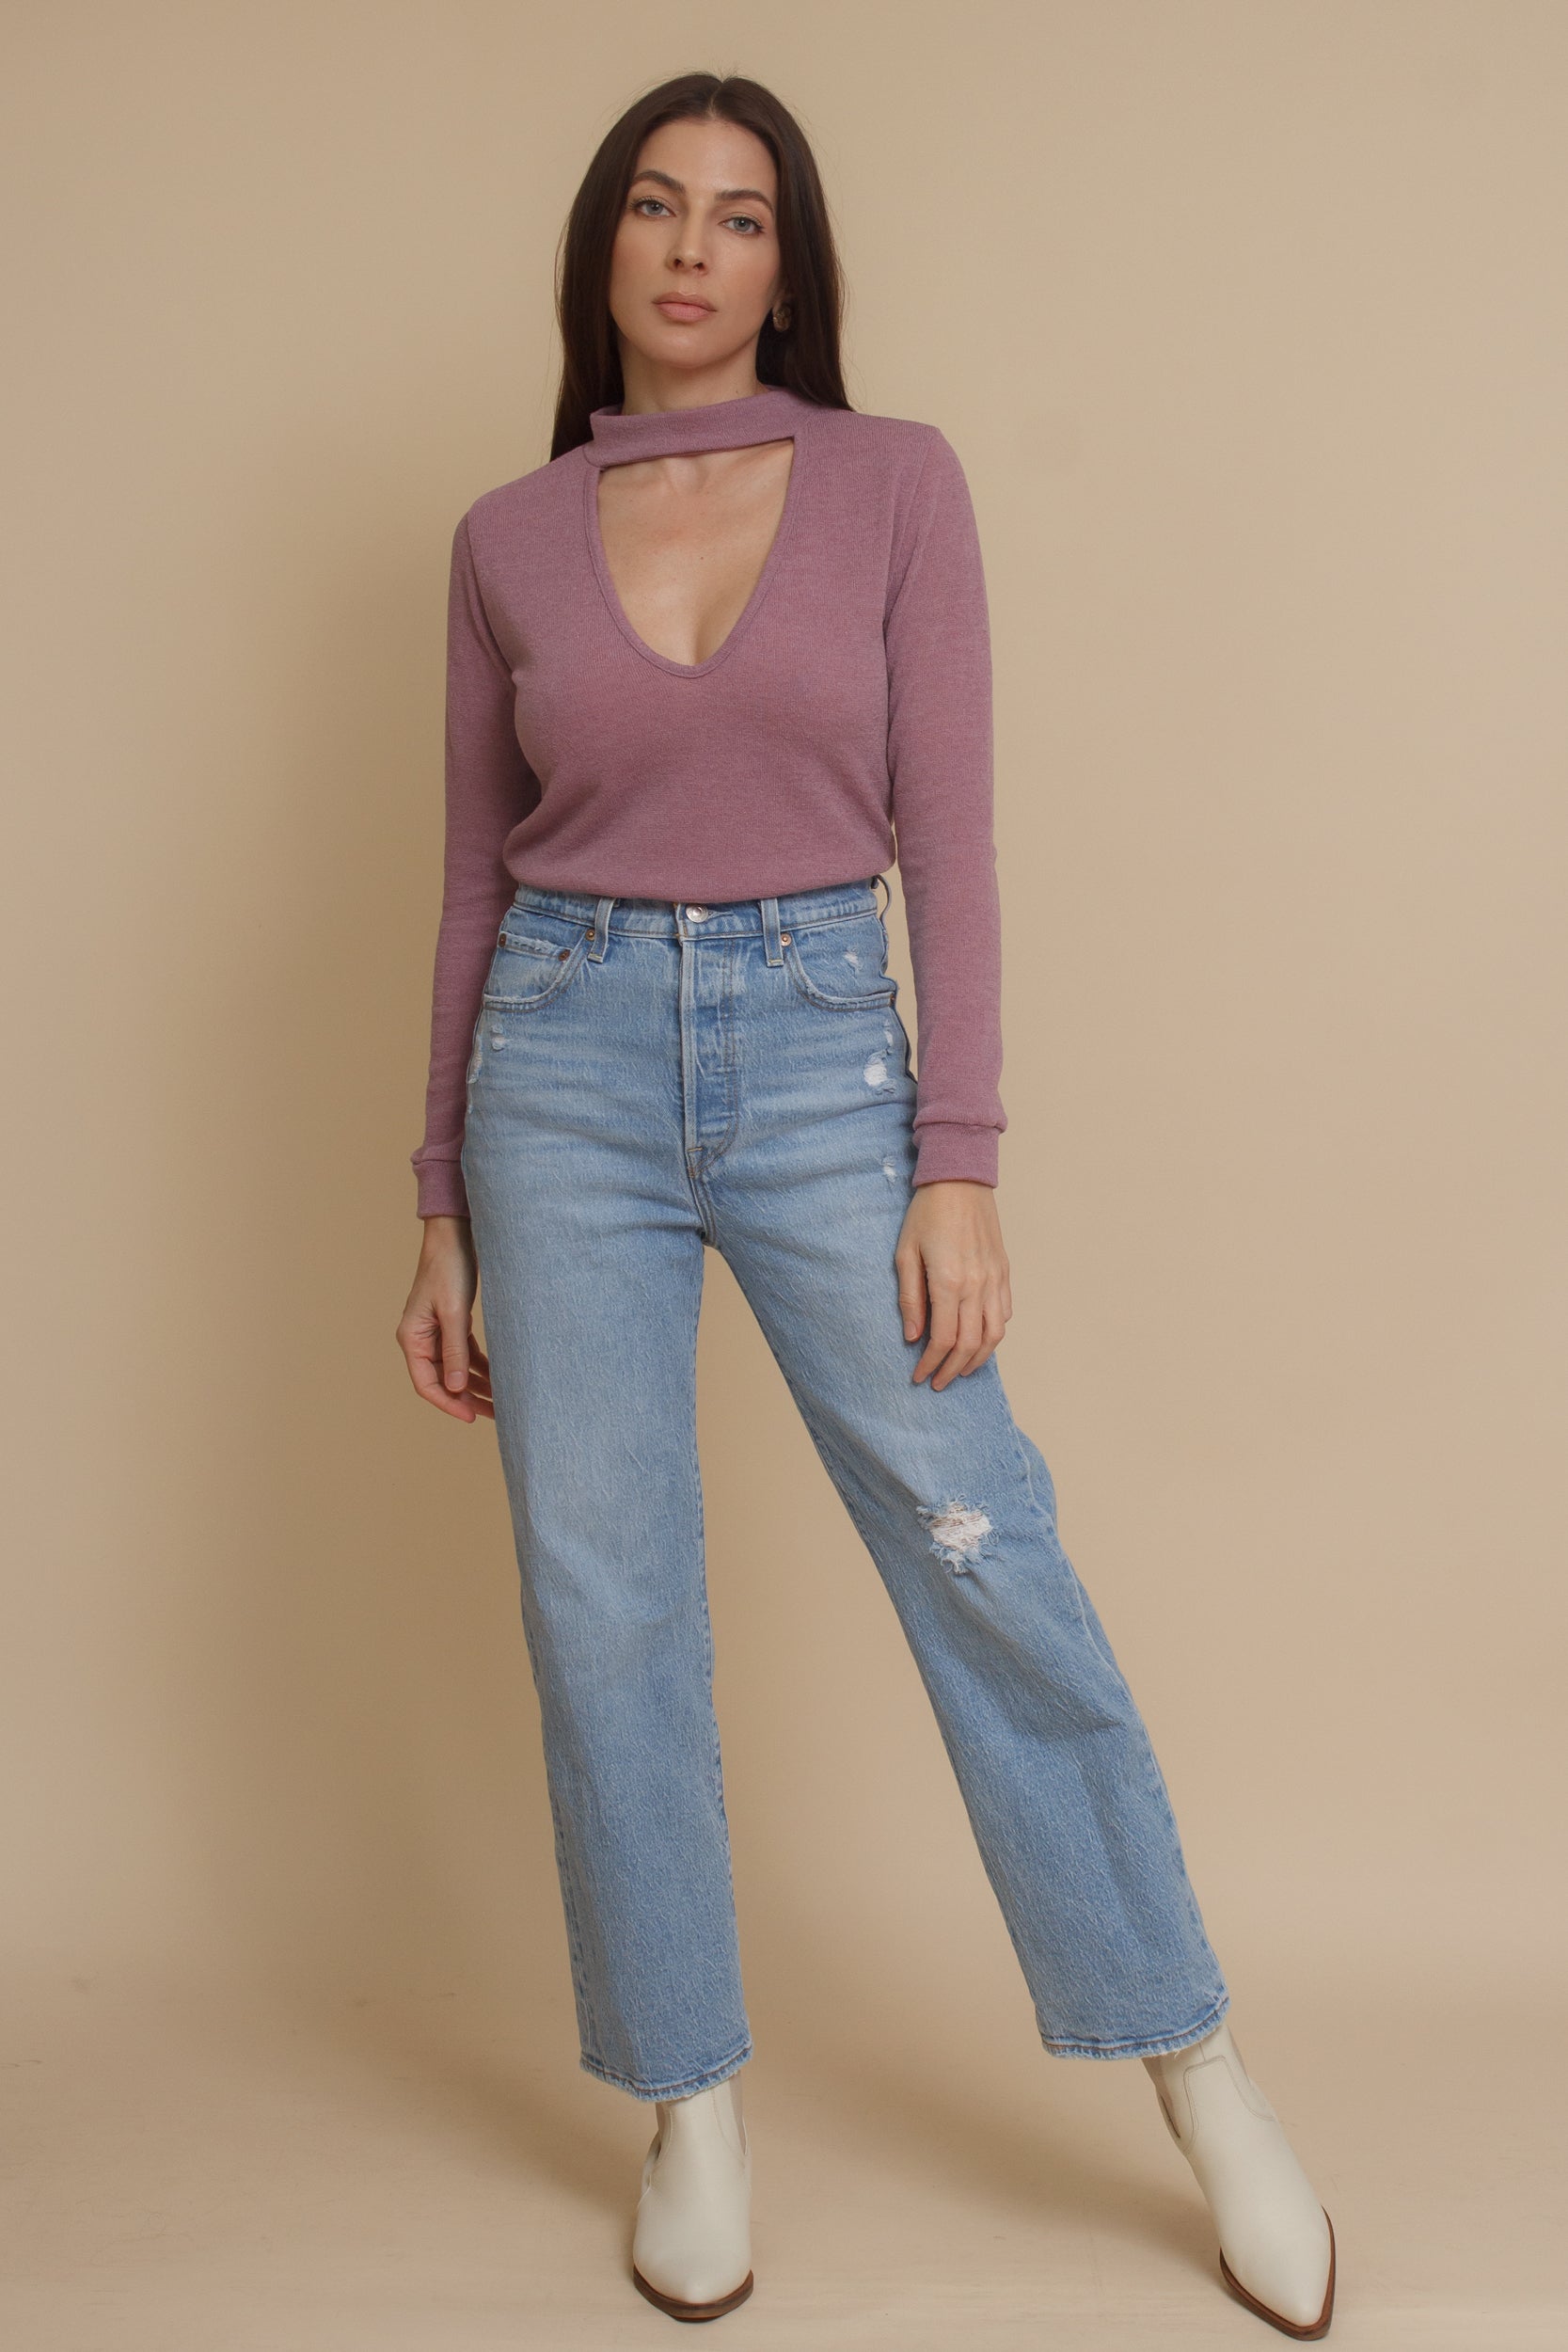 Knit top with choker cut out neckline, in mauve. Image 14